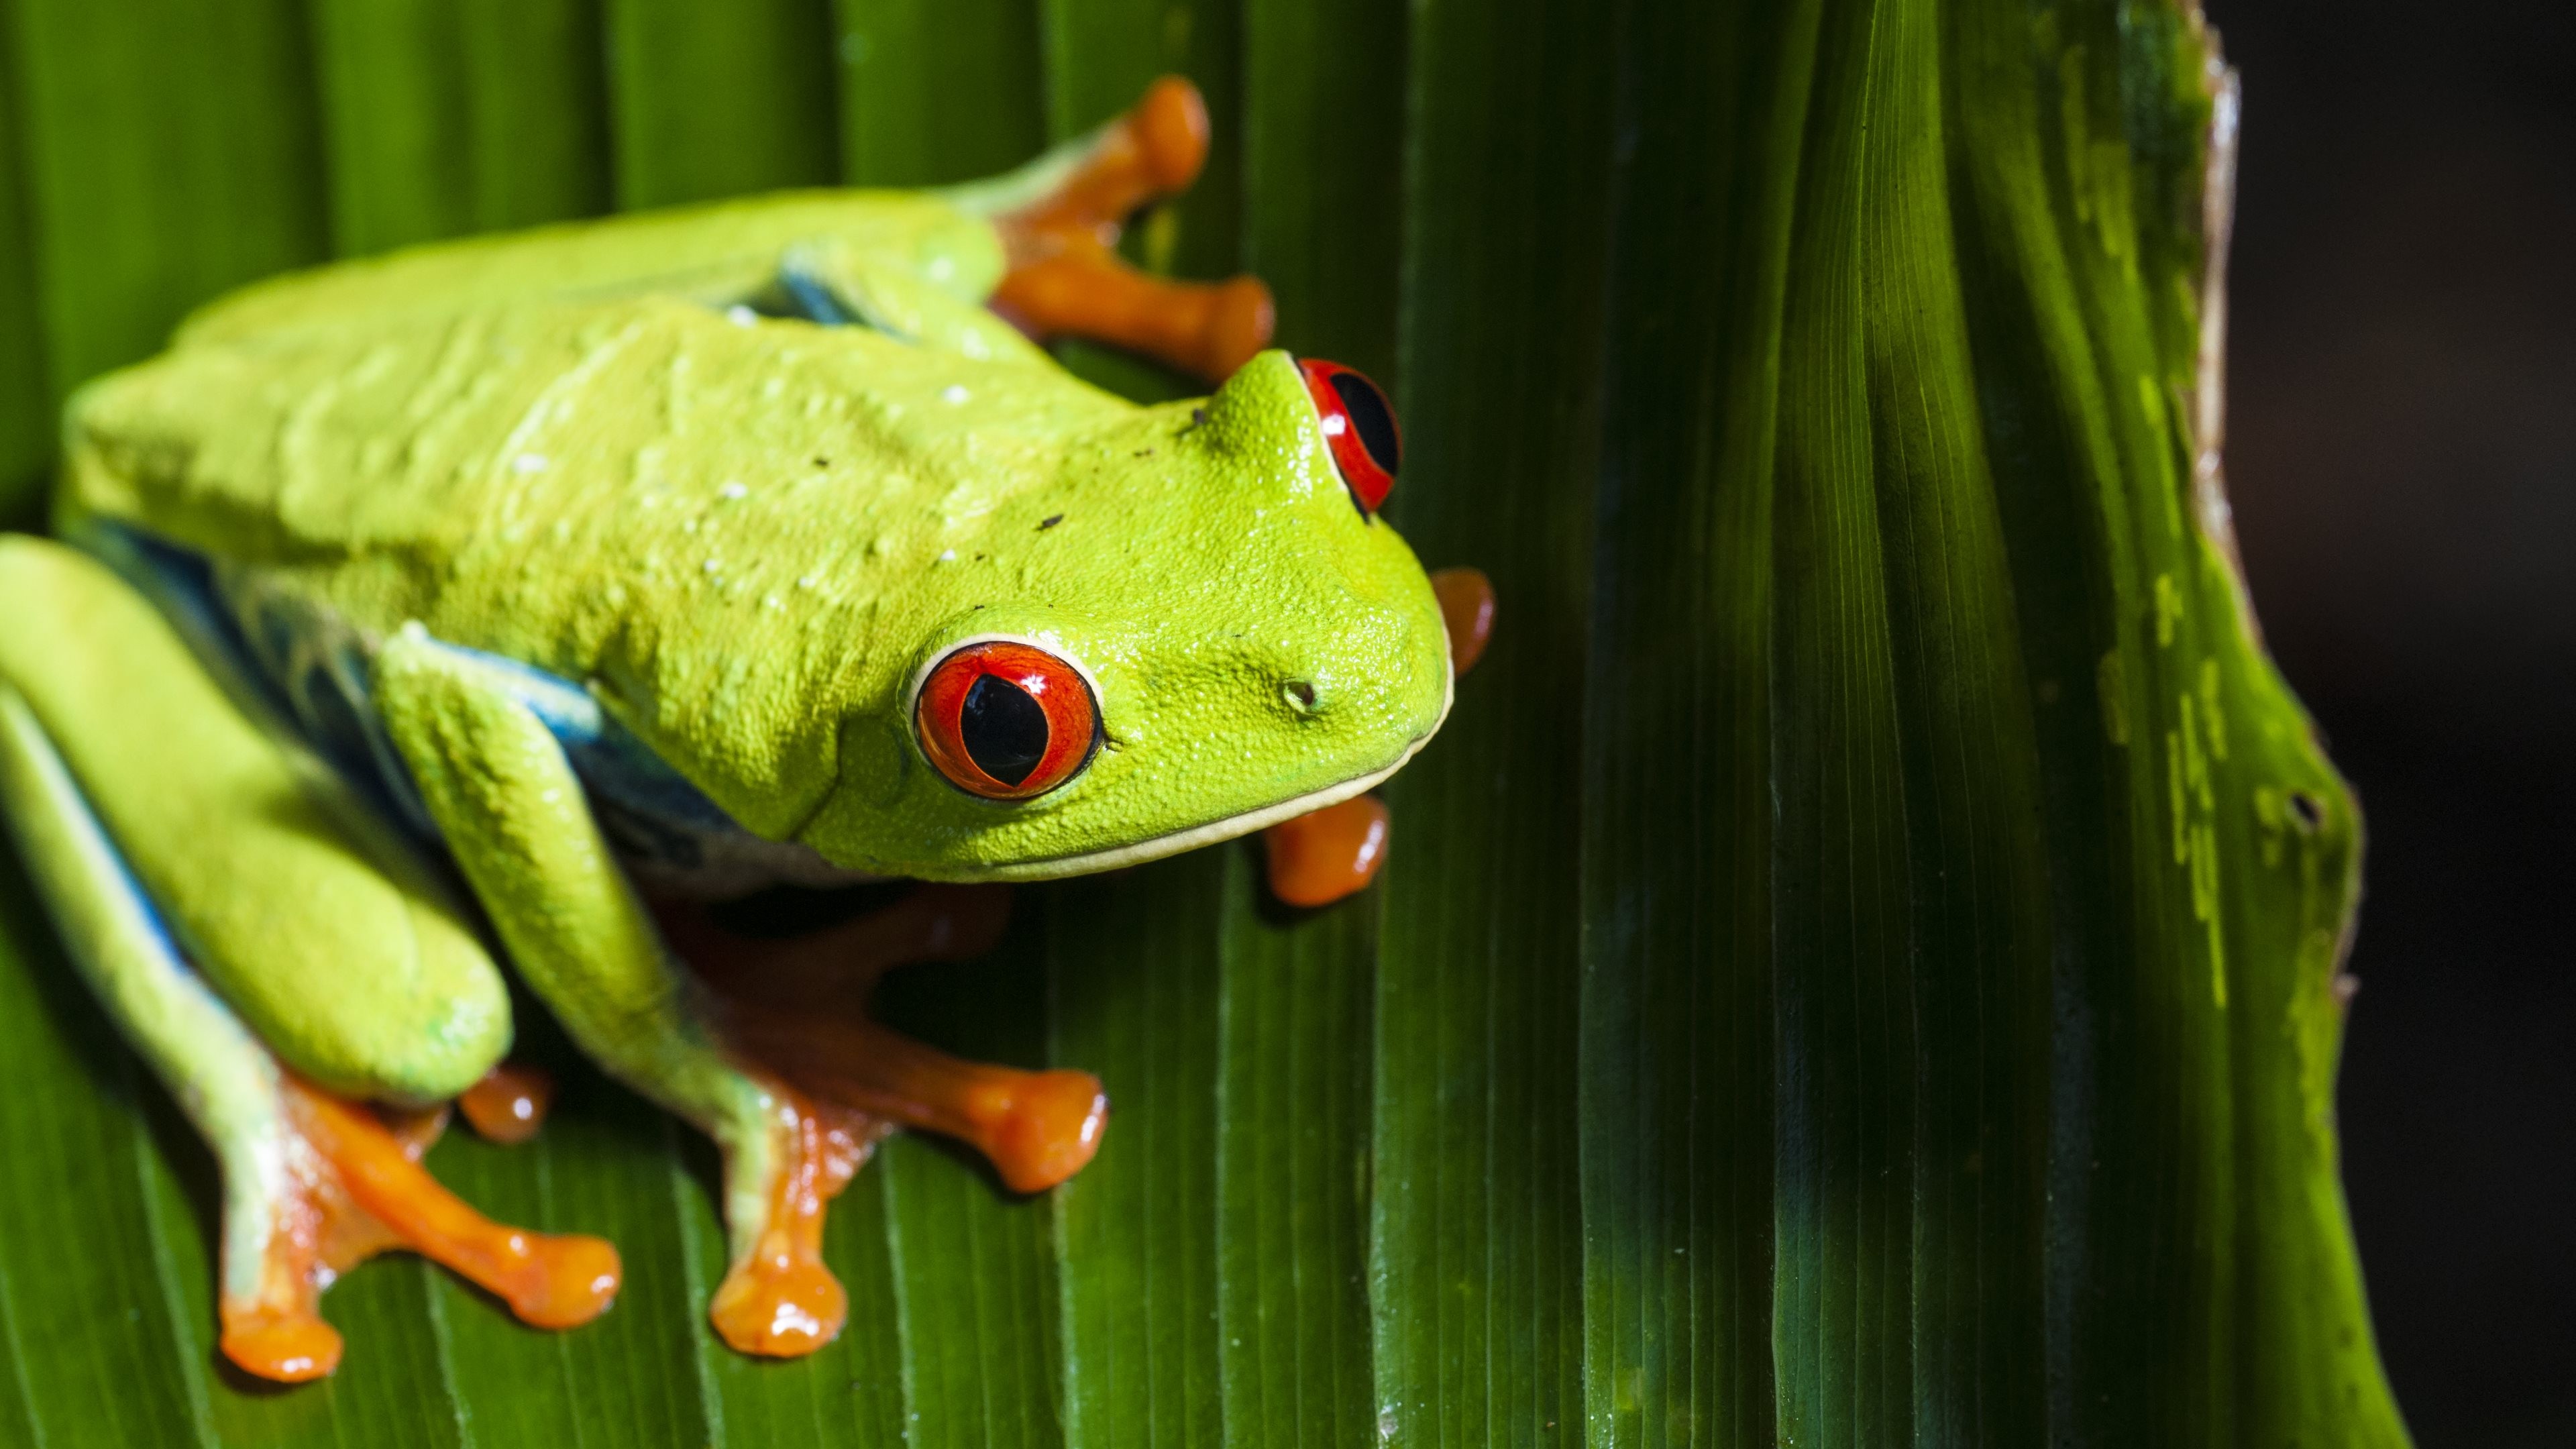 General 3840x2160 animals nature frog macro Red-Eyed Tree Frogs amphibian